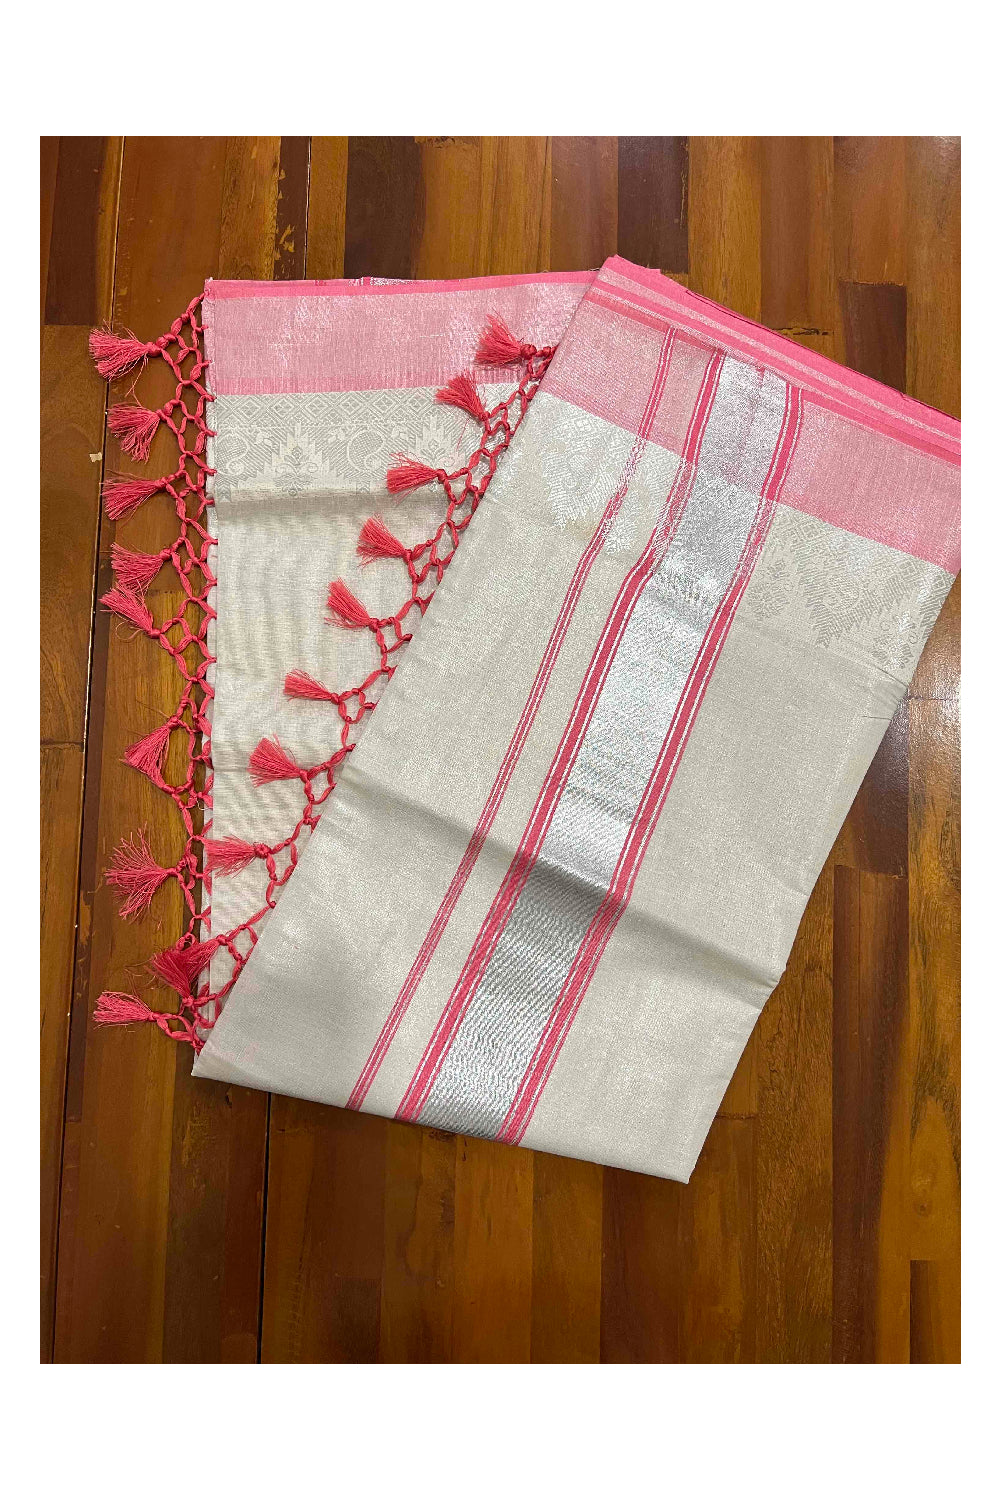 Kerala Silver Tissue Plain Saree with Pink and Silver Border